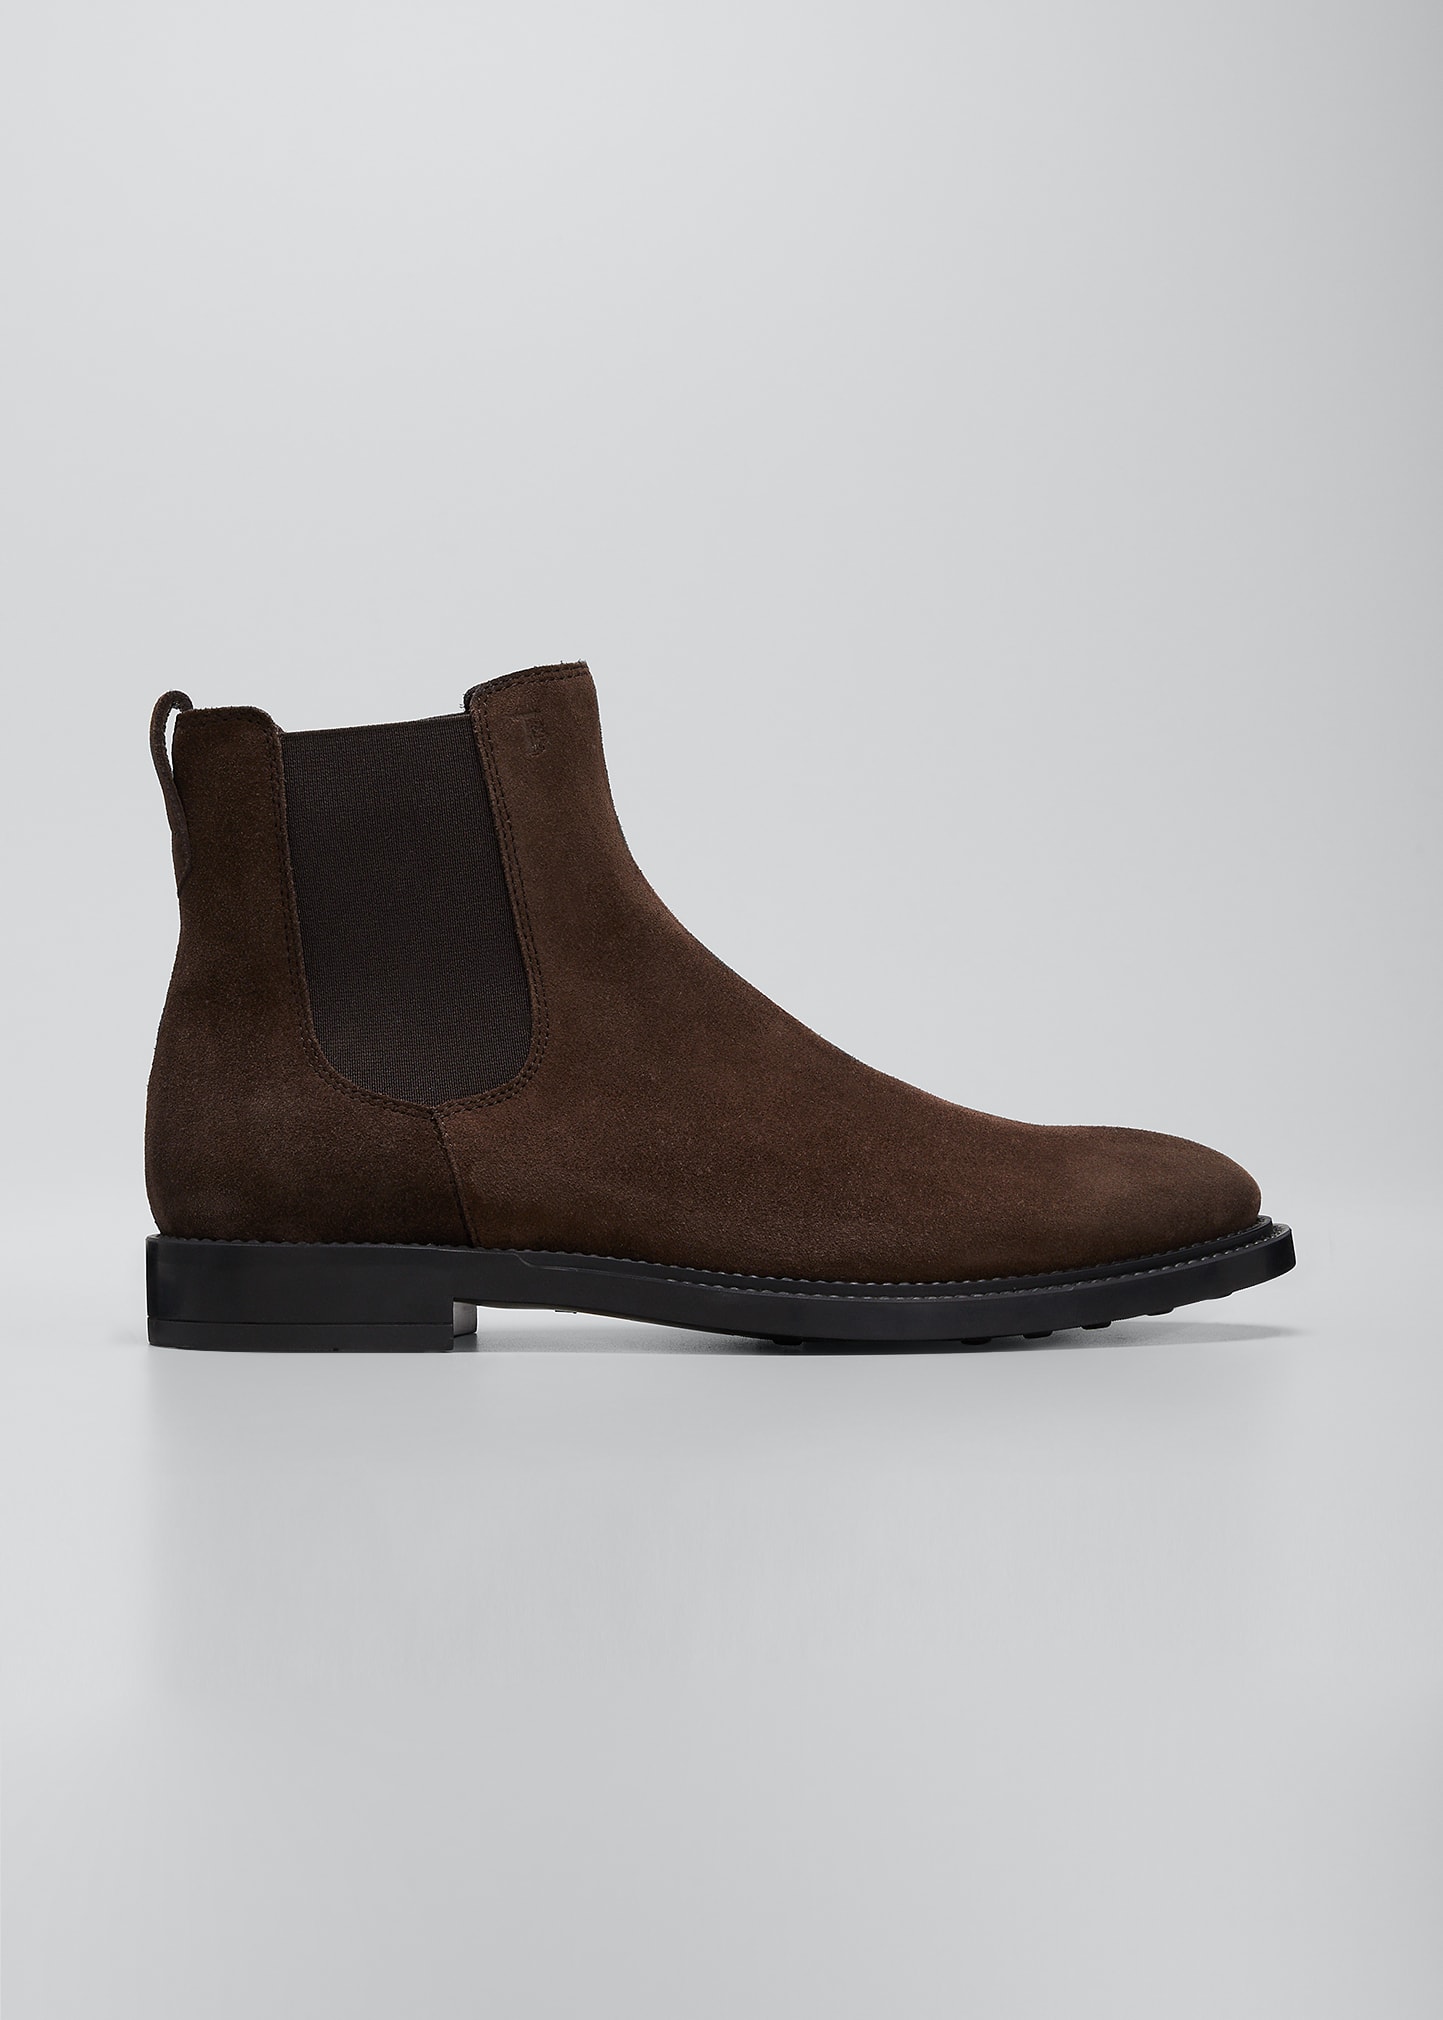 Tod's Men's Gored Suede Chelsea Boots